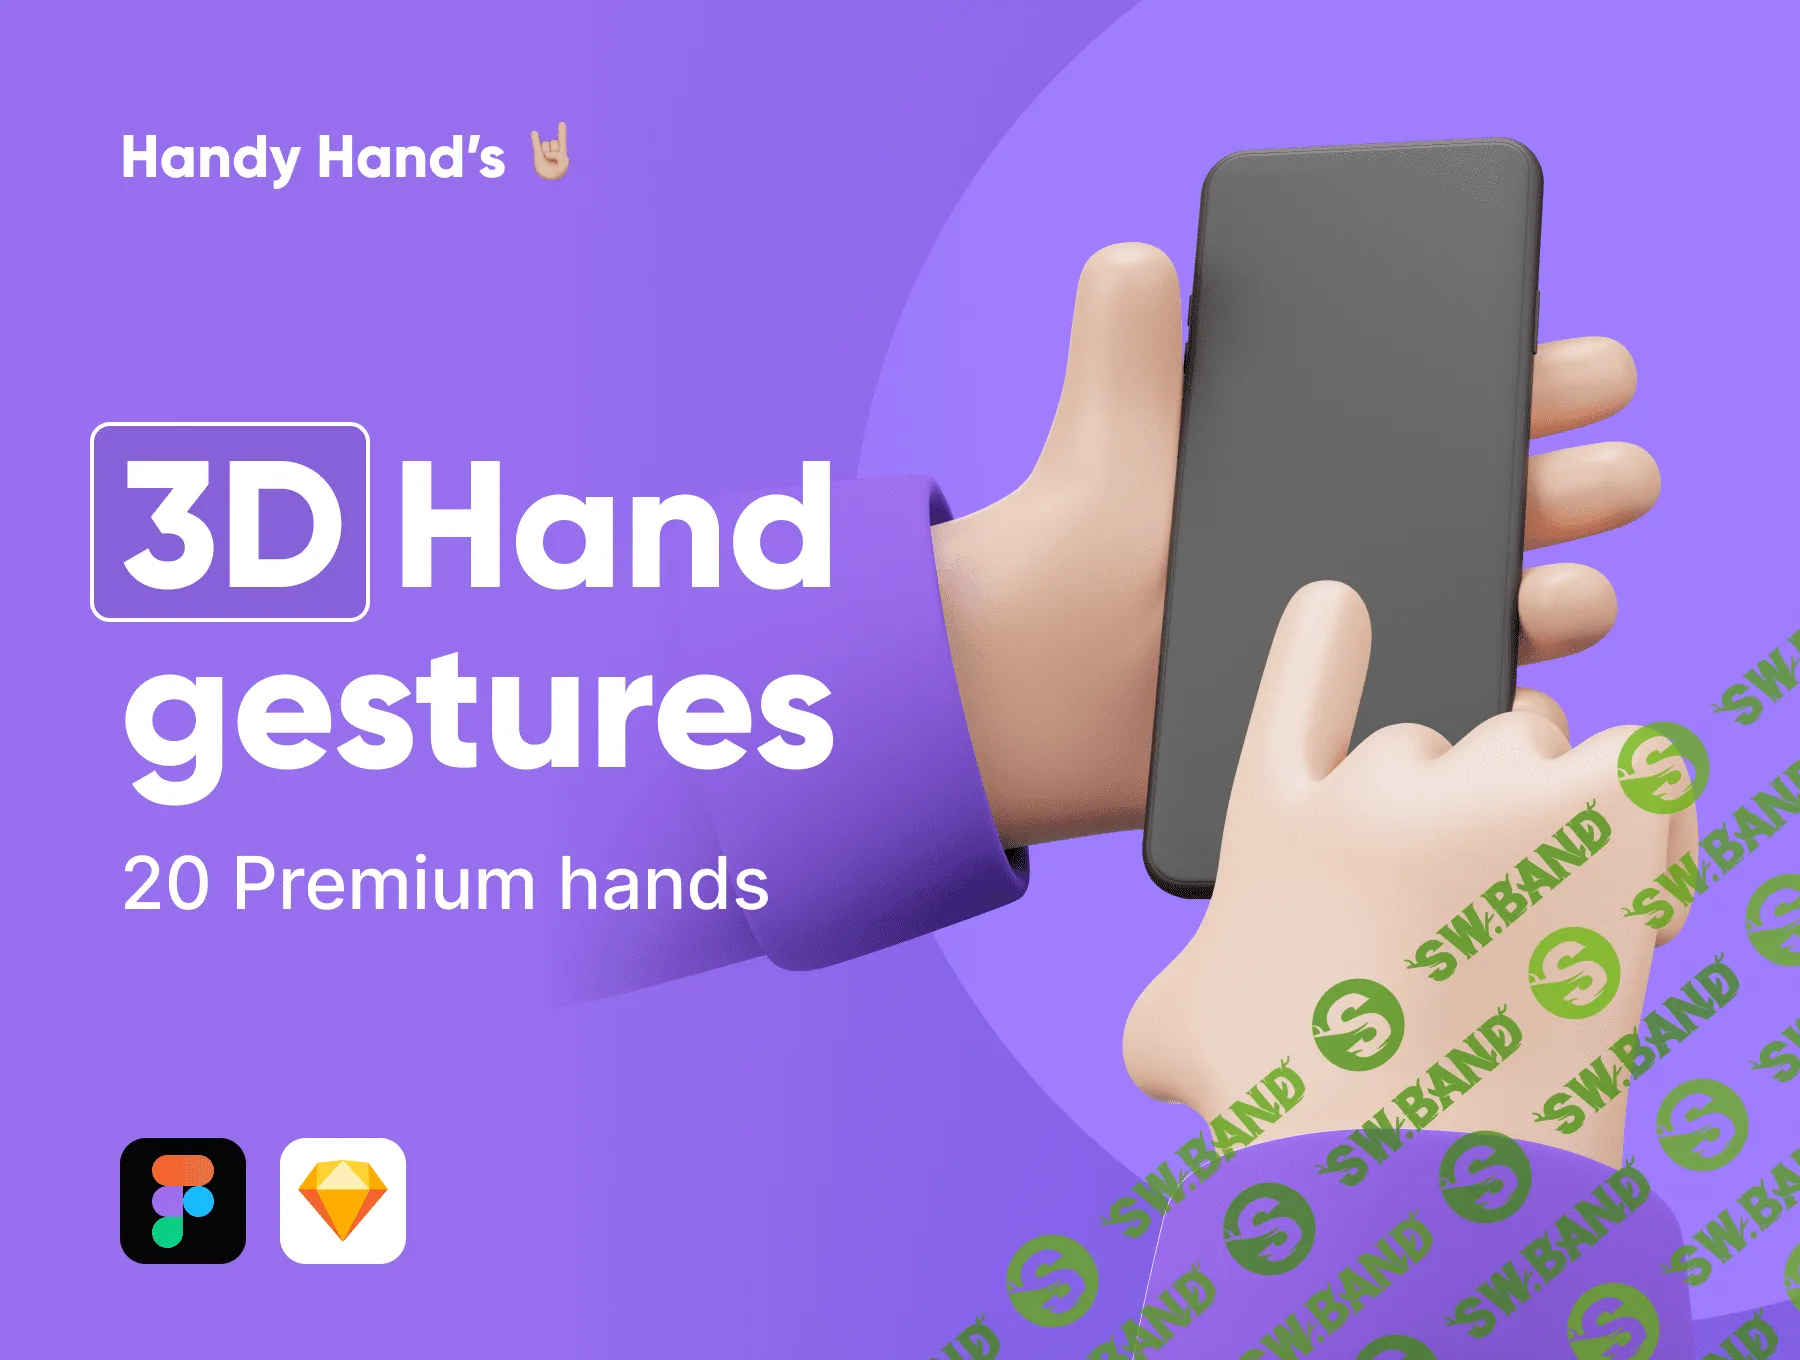 [UI8] Handy hands! Easily customizable 3D hands for your Websites, Applications, Presentations (2021)